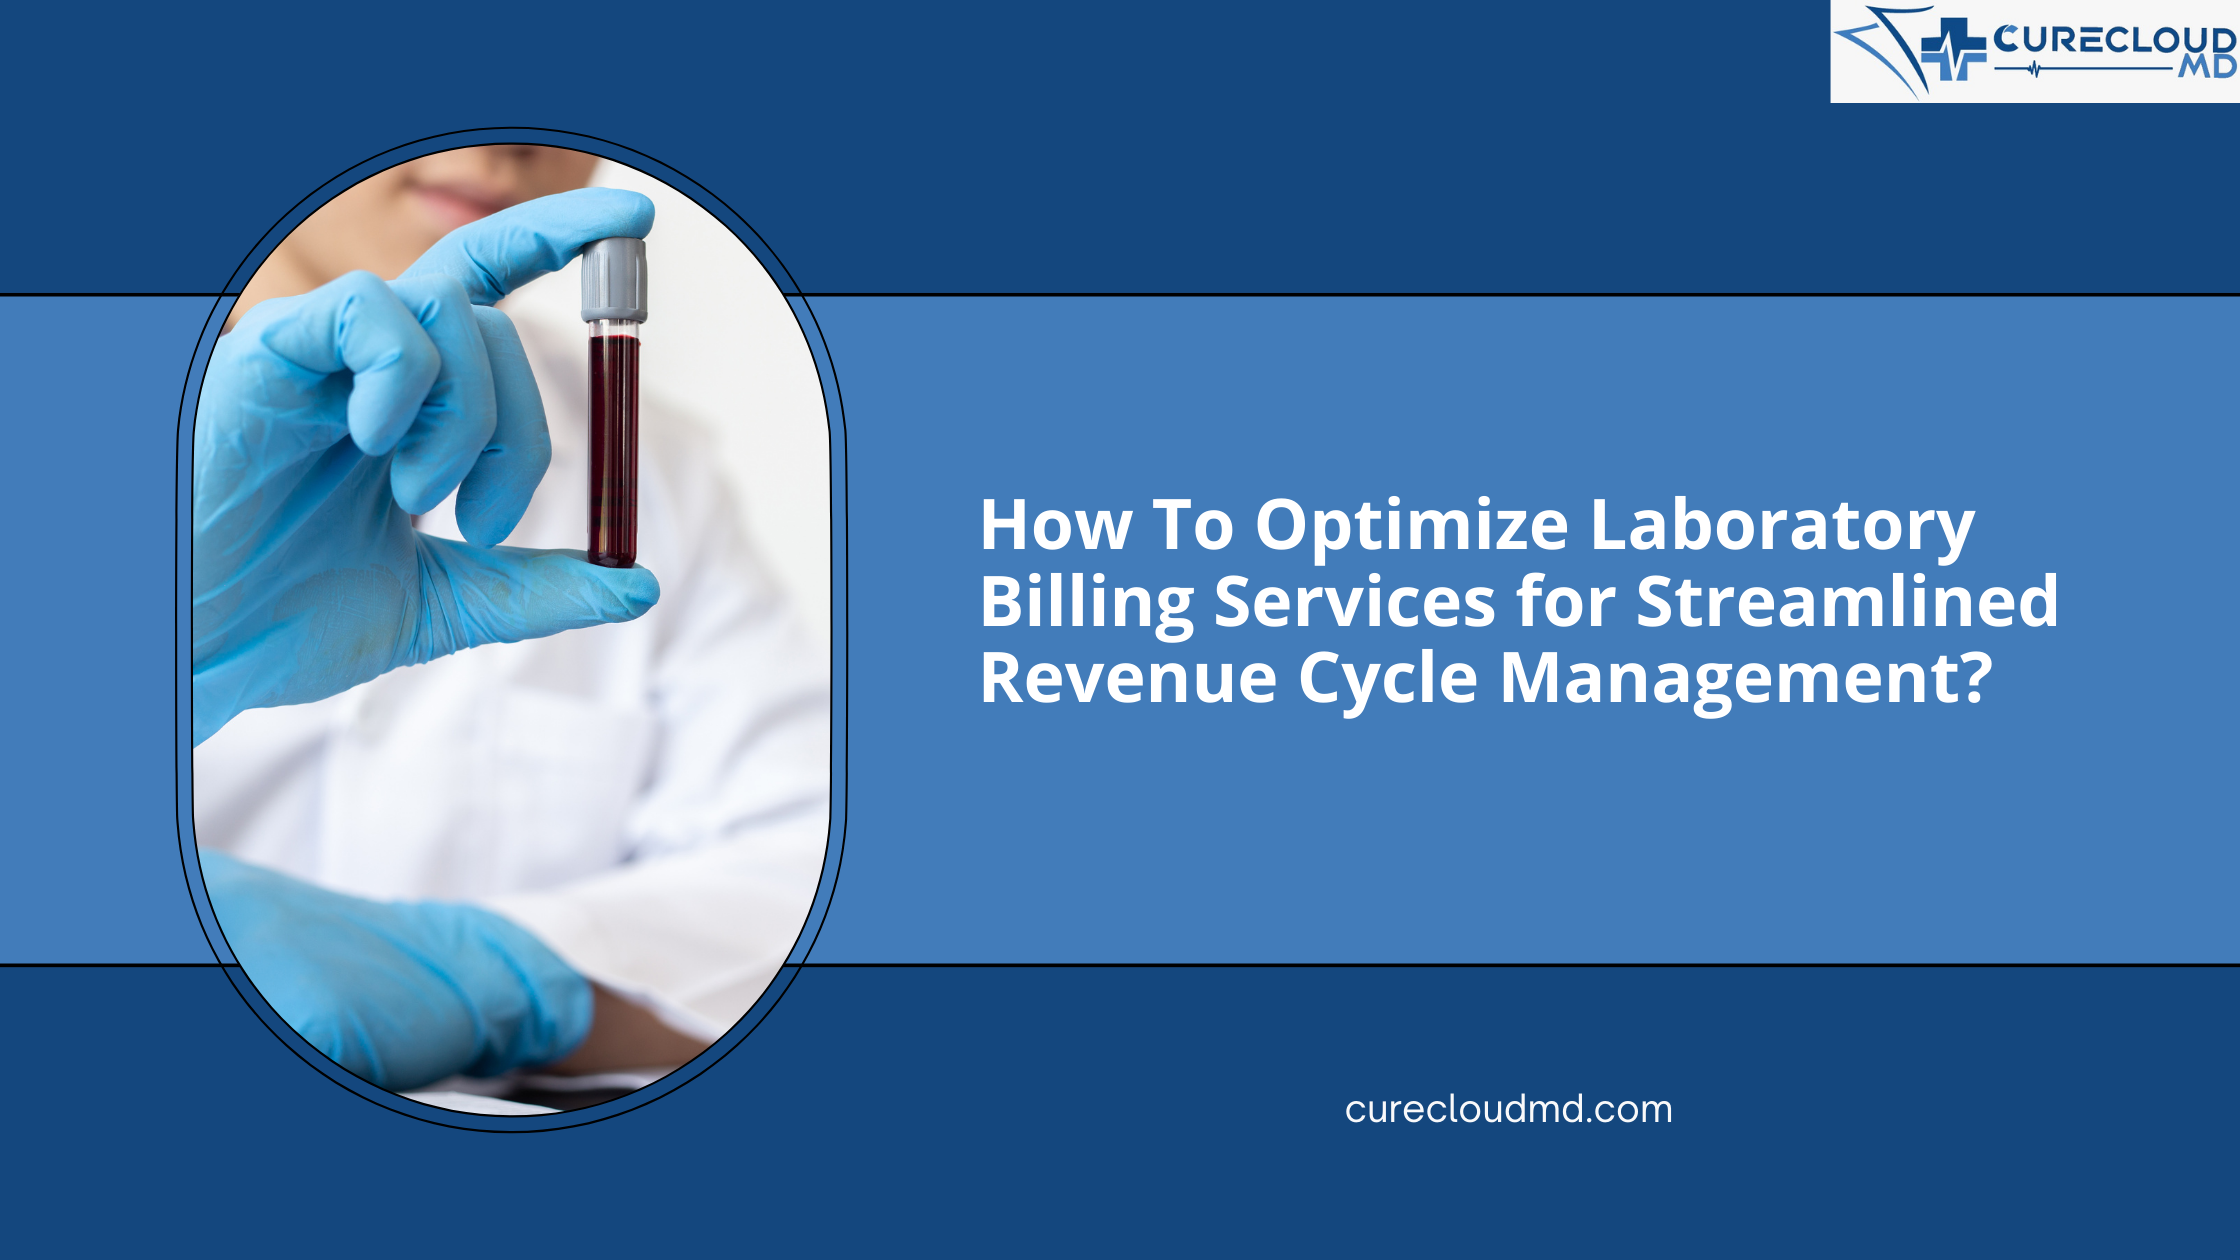 How To Optimize Laboratory Billing Services for Streamlined Revenue Cycle Management